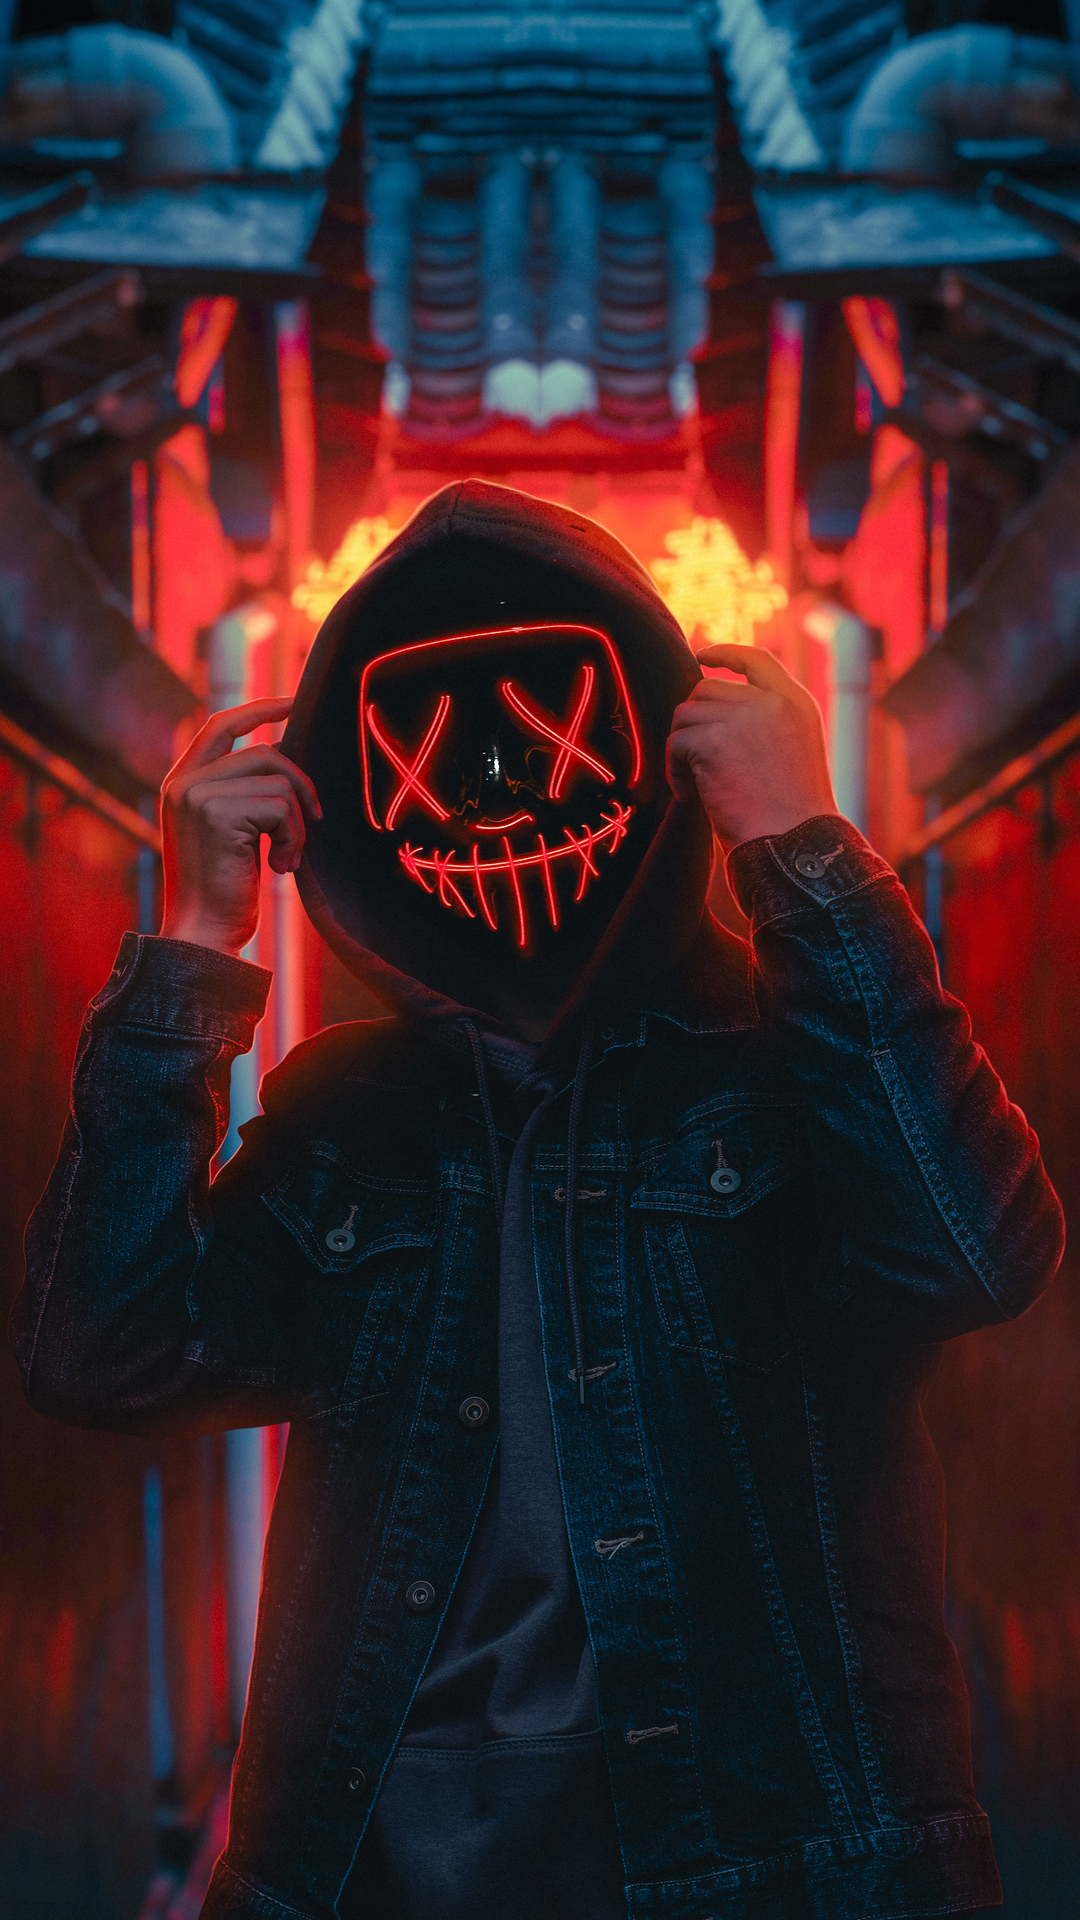 Hoodie Guy Red Neon Light 4k iPhone 6s, 6 Plus, Pixel xl , One Plus 3t, 5 HD 4k Wallpaper, Image, Background, Photo and Picture